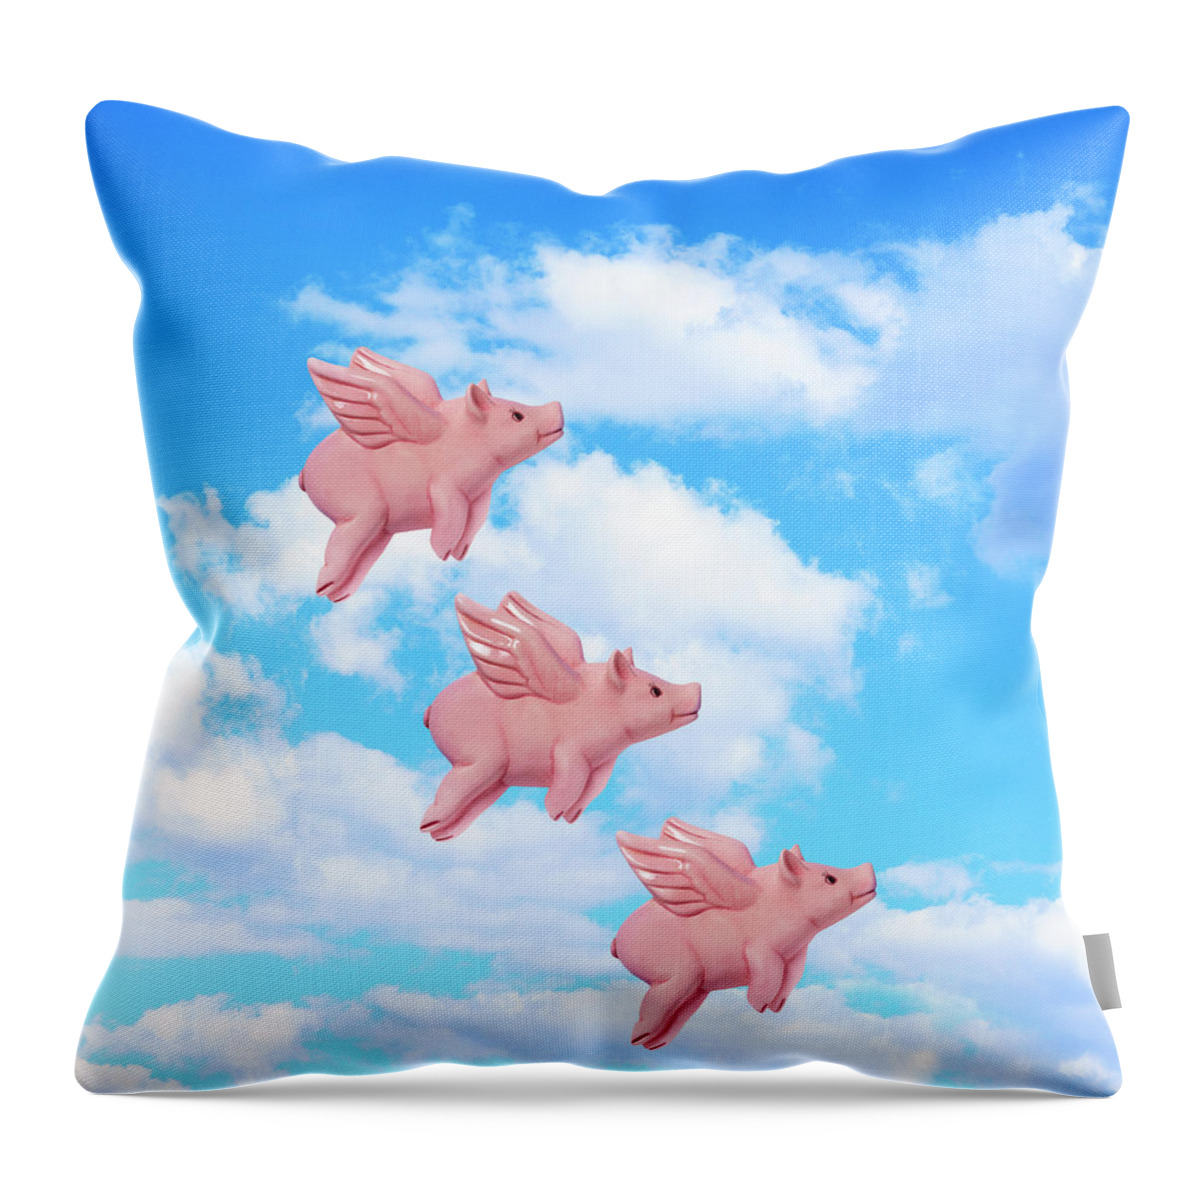 Disbelief Throw Pillow featuring the photograph Pigs Might Fly by Peter Dazeley